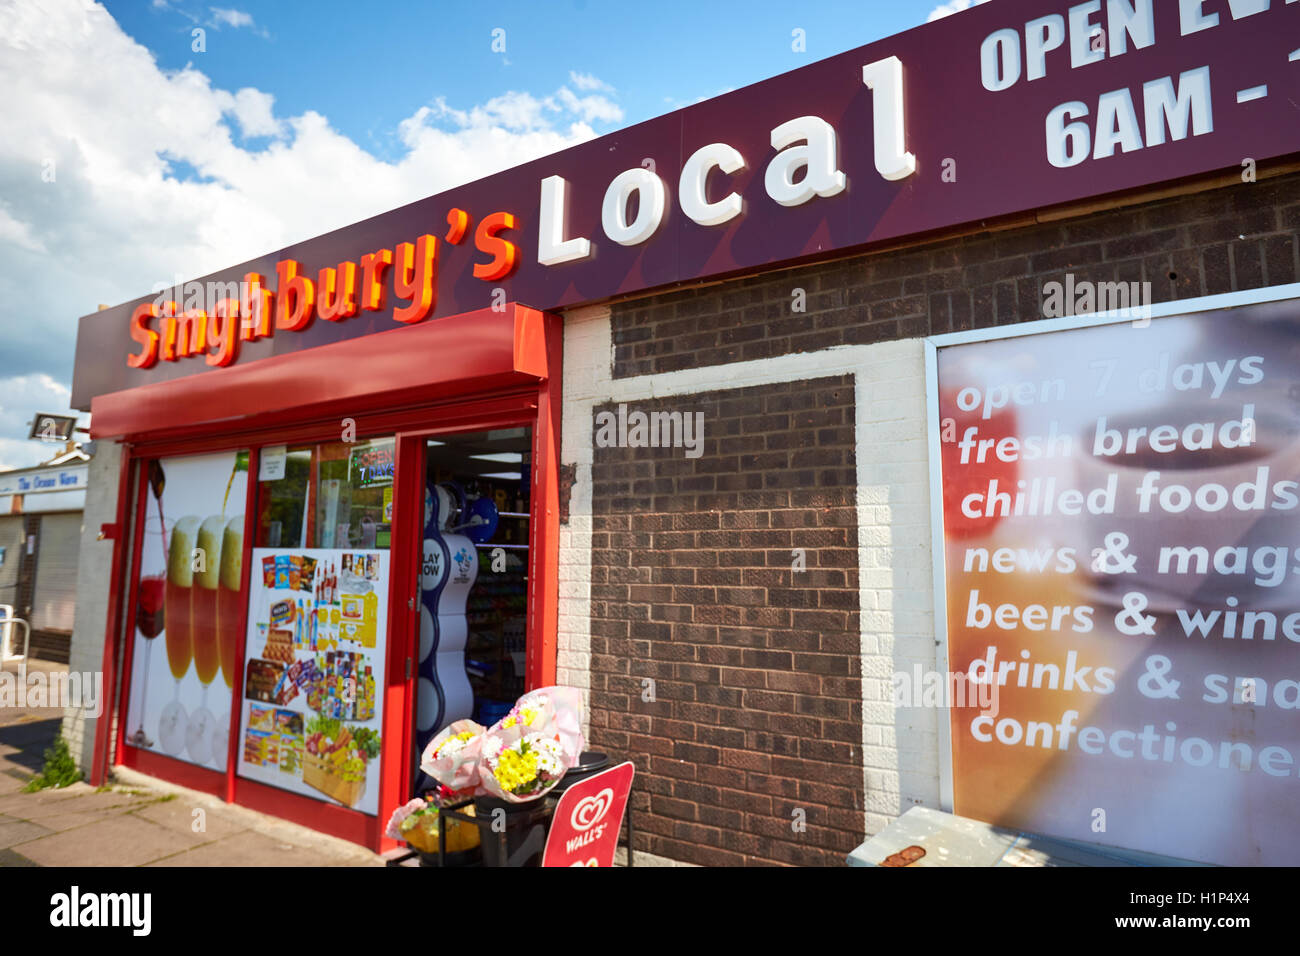 A convenience store called Singhbury's in Aylesbury with branding that looks similar to a Sainsbury's Local Stock Photo